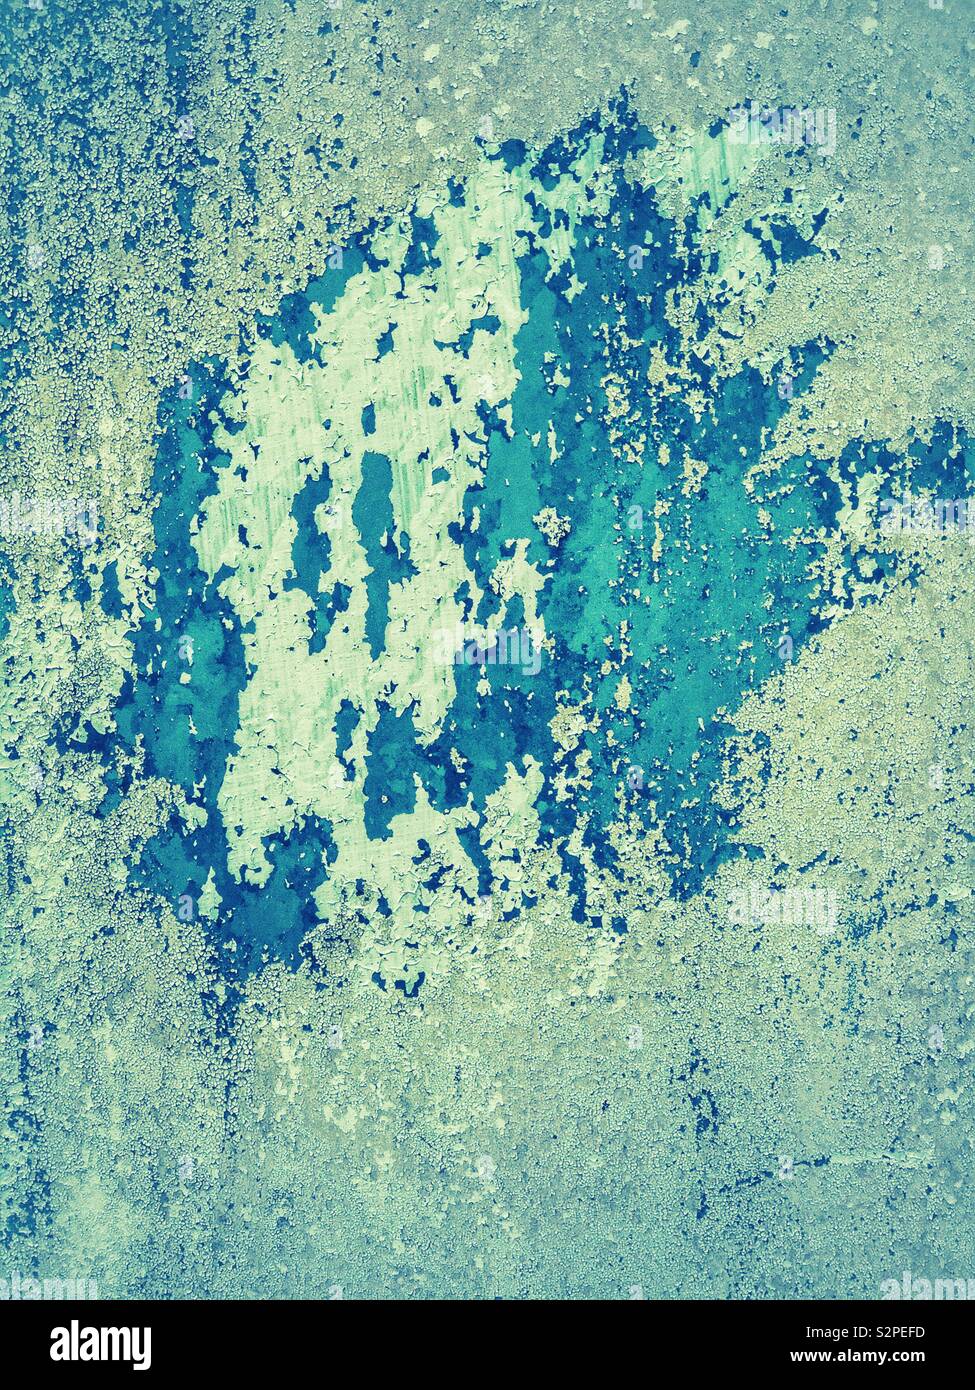 Peeling and decaying paint on a wooden door. Stock Photo